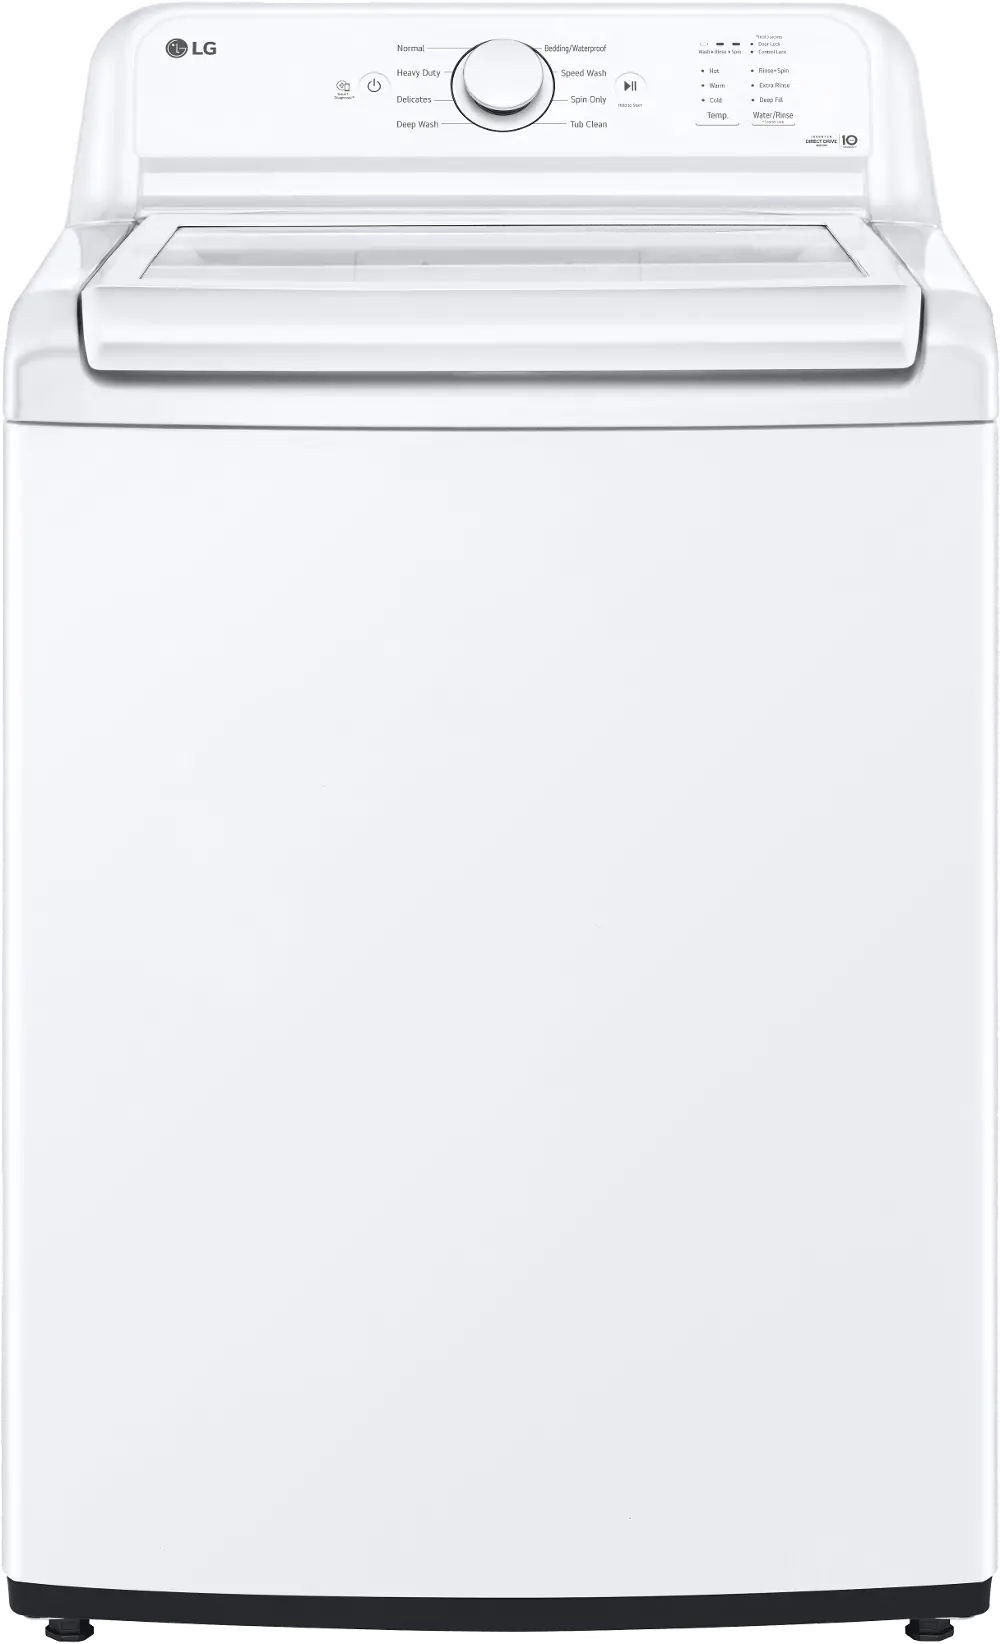 WT6105CW LG 4.1 cu ft Top Load Washer with Agitator - White, 6100W-1